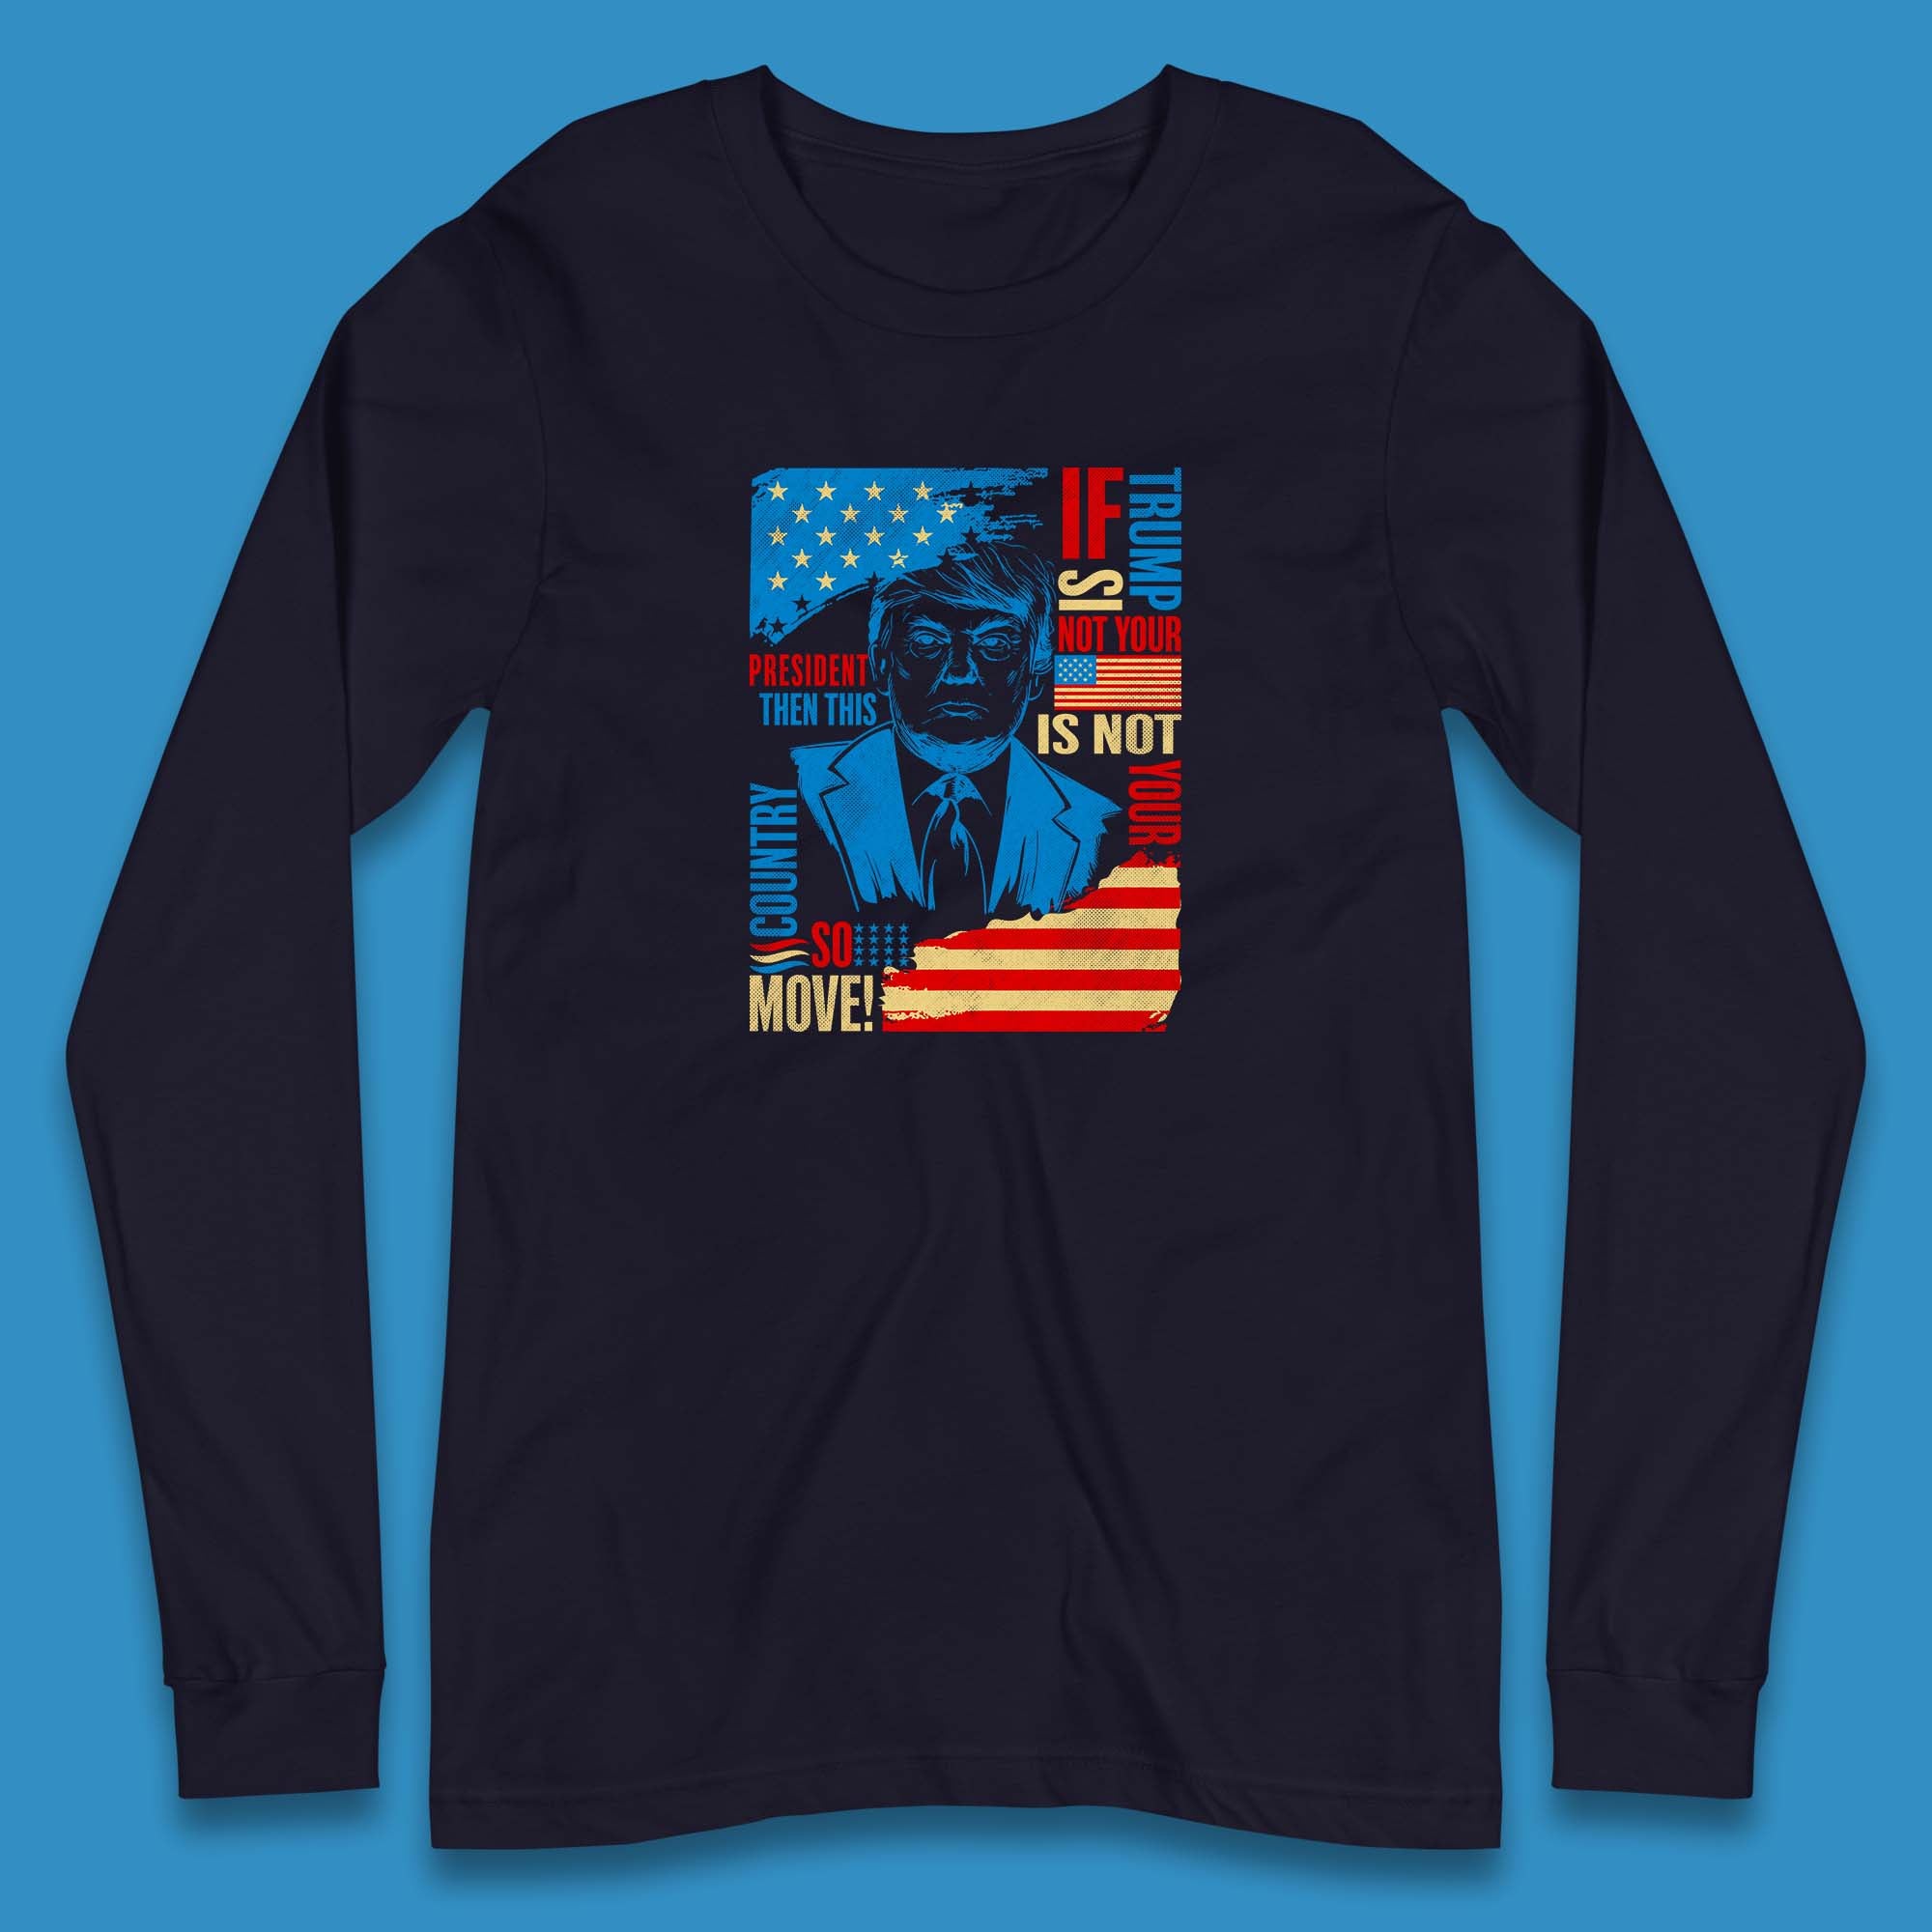 If Trump Is Not Your President Then This Is Not Your Country So Move President Election Republicans Campaign Long Sleeve T Shirt